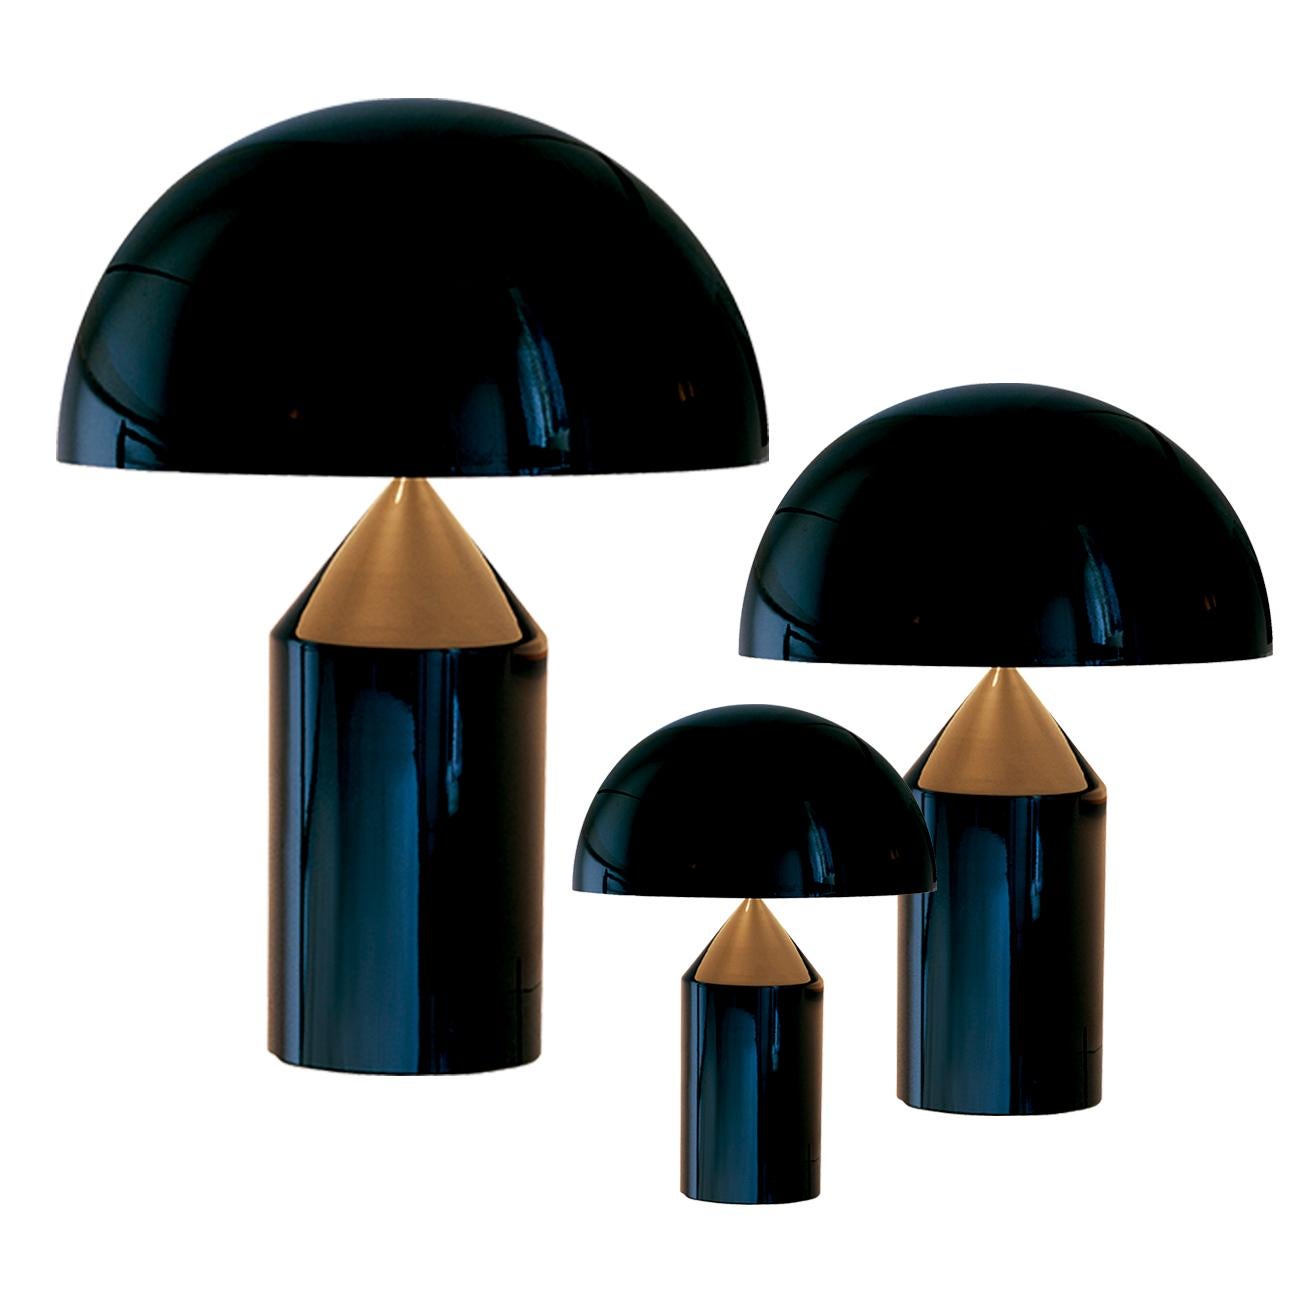 Table lamp designed by Vico Magistretti in 1977
Manufactured by Oluce, Italy.

Designed in 1977 by Vico Magistretti, over the years, Atollo has become the archetype of the table lamp, winning the Compasso d’Oro in 1979 and completely revolutionising